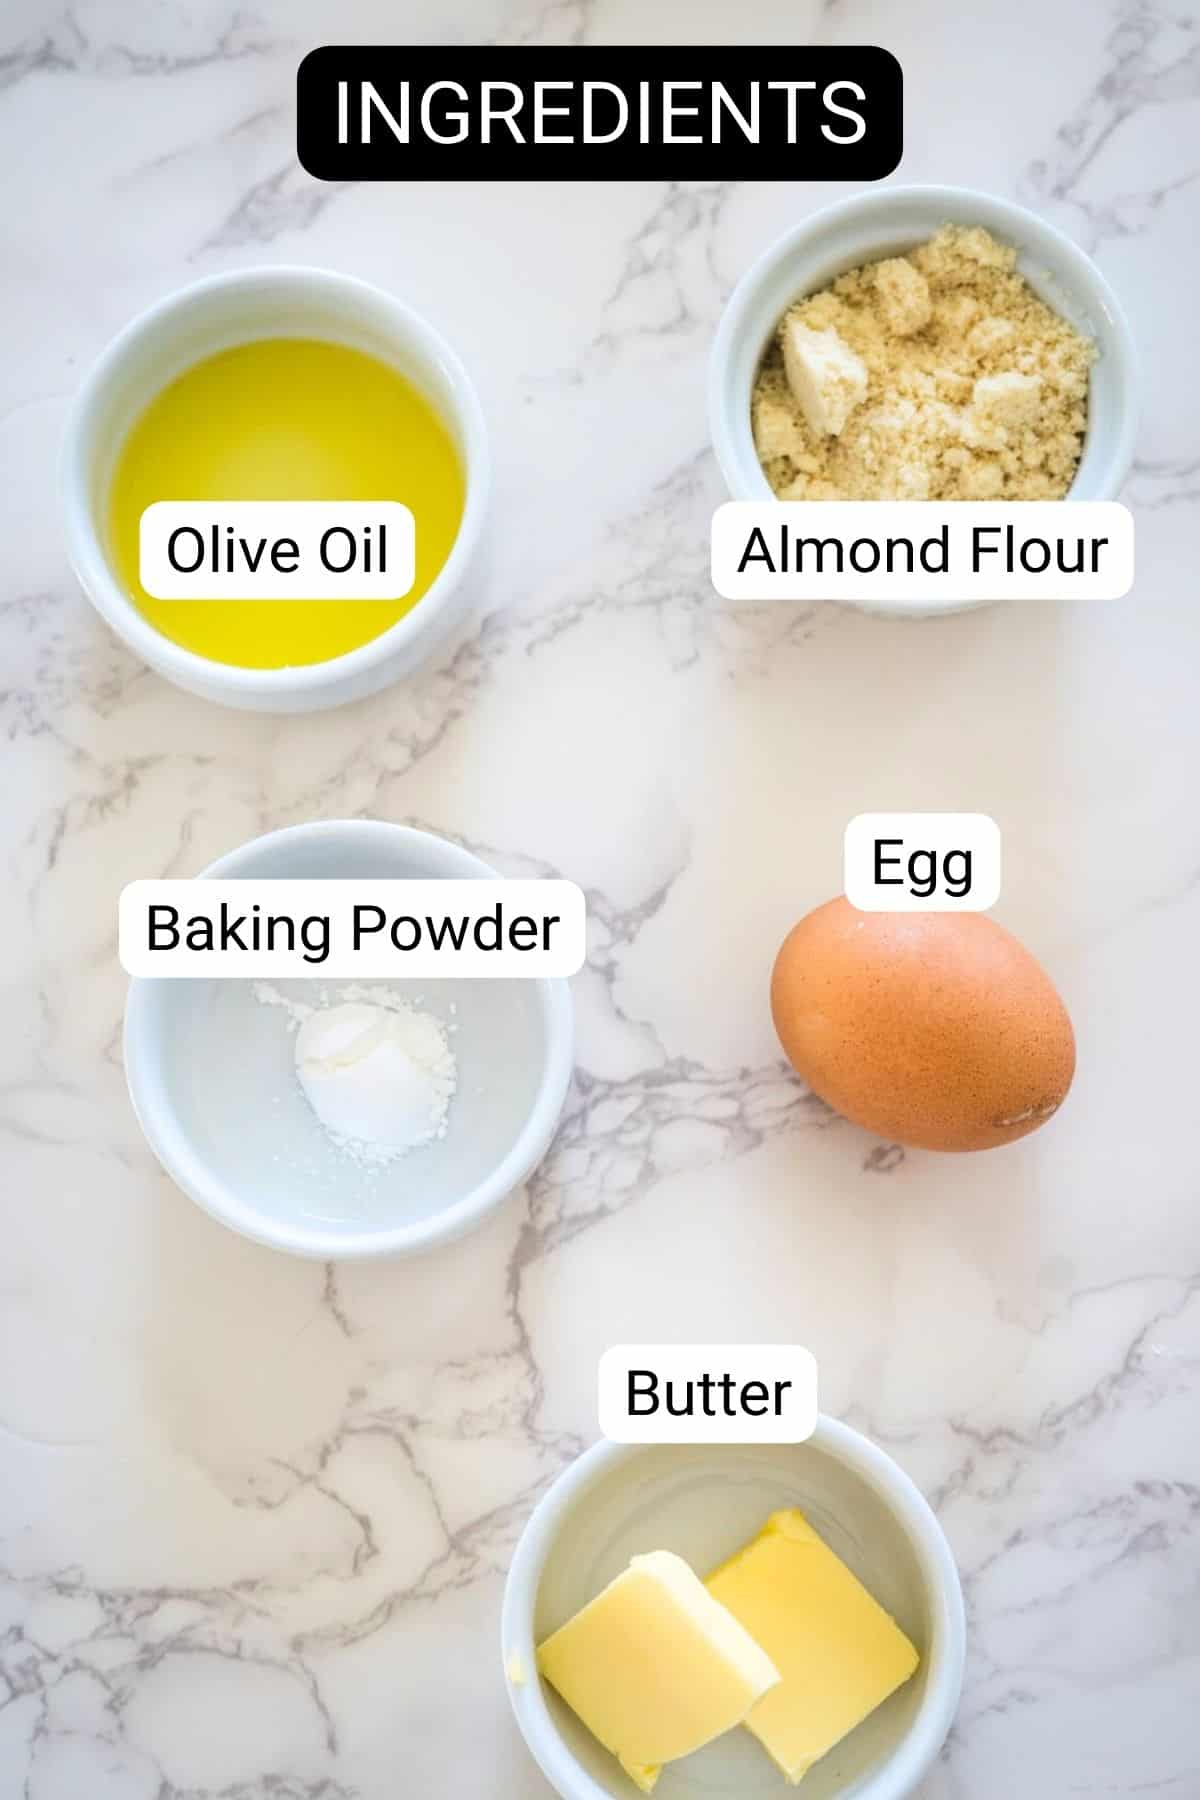 Various baking ingredients labeled on a marble surface, including olive oil, almond flour, keto bread crumbs, an egg, and butter.